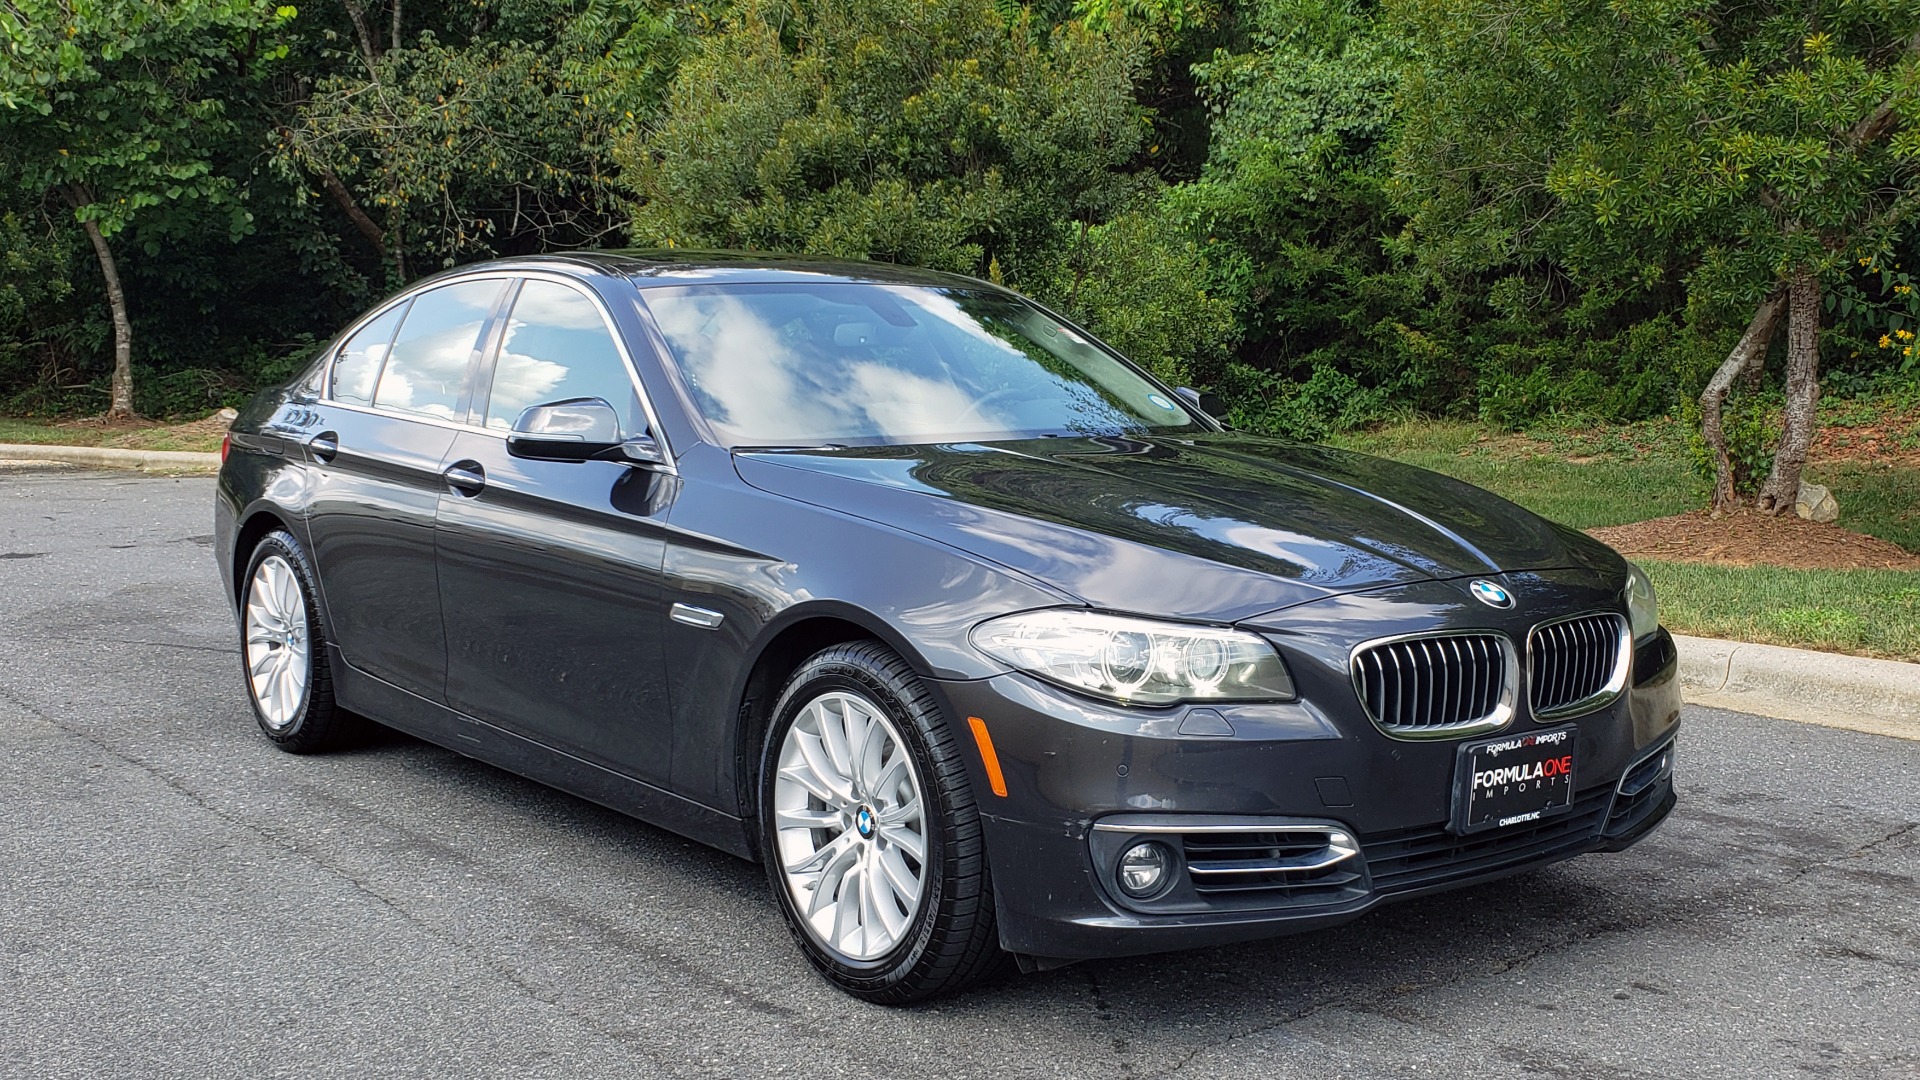 Used 2016 BMW 5 SERIES 528I XDRIVE / PREM / LUX / DRVR ASST / CLD WTHR / REARVIEW for sale Sold at Formula Imports in Charlotte NC 28227 4